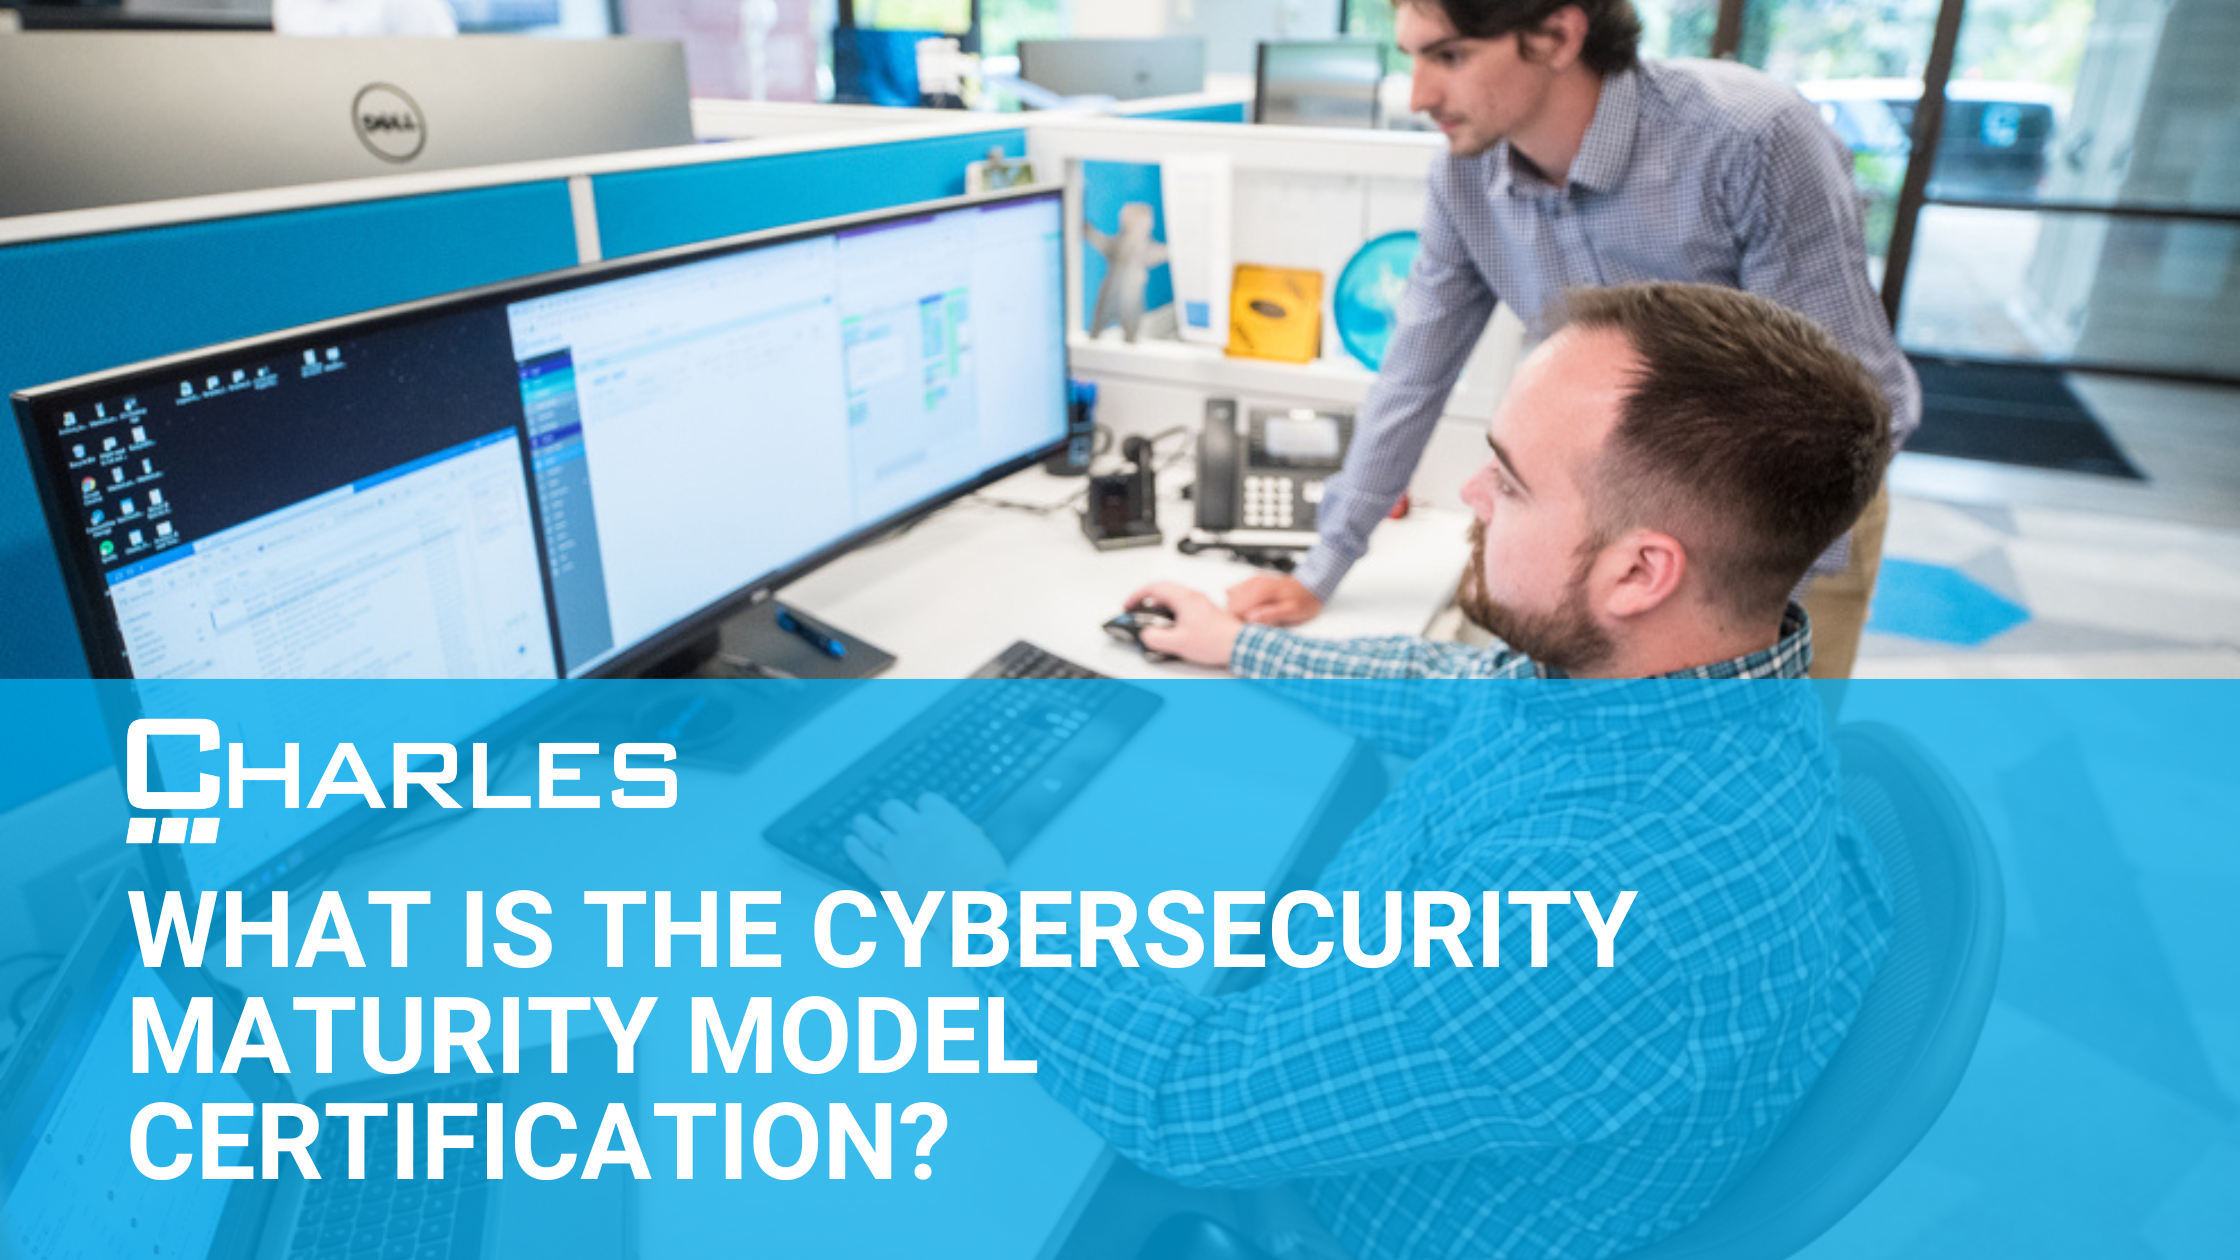 What is the Cybersecurity Maturity Model Certification (CMMC)